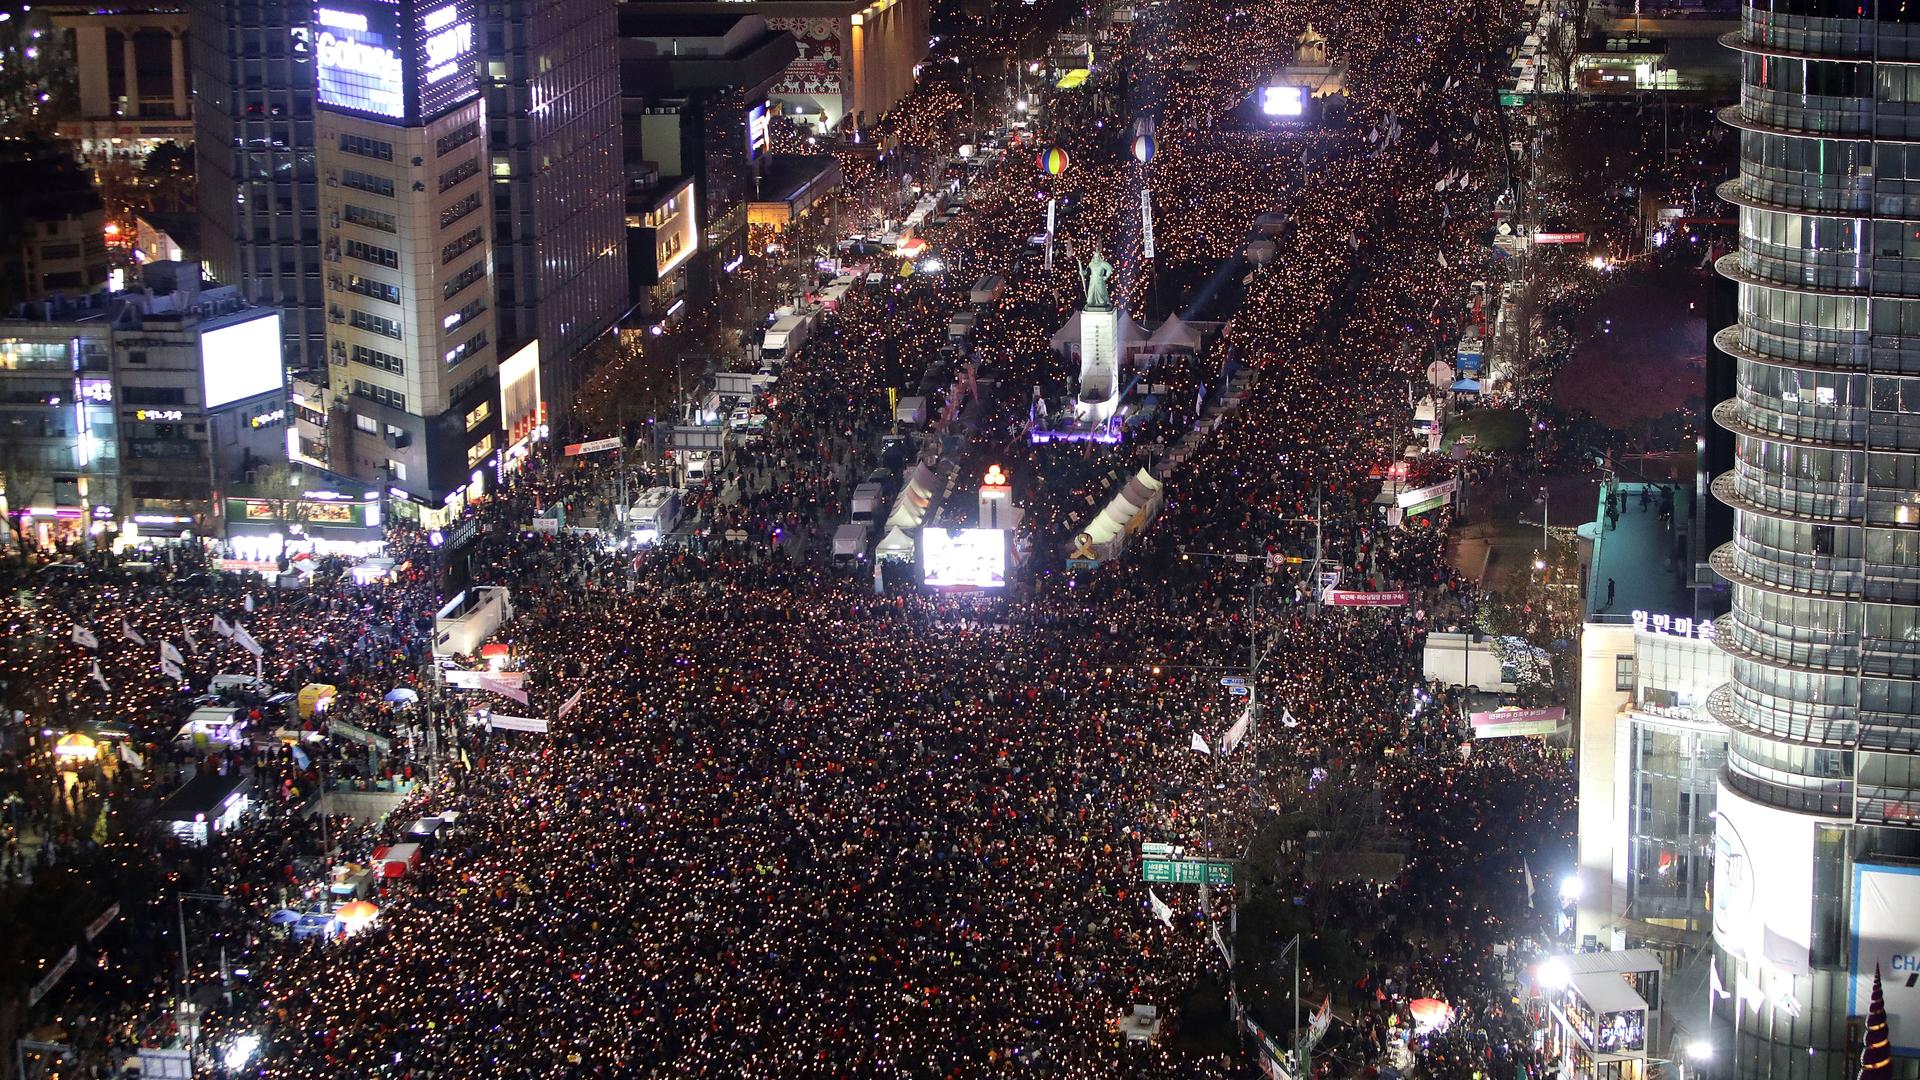 Protesters gather and occupy major streets in the city center for a rally against South Korean President Park Geun-hye in Seoul.